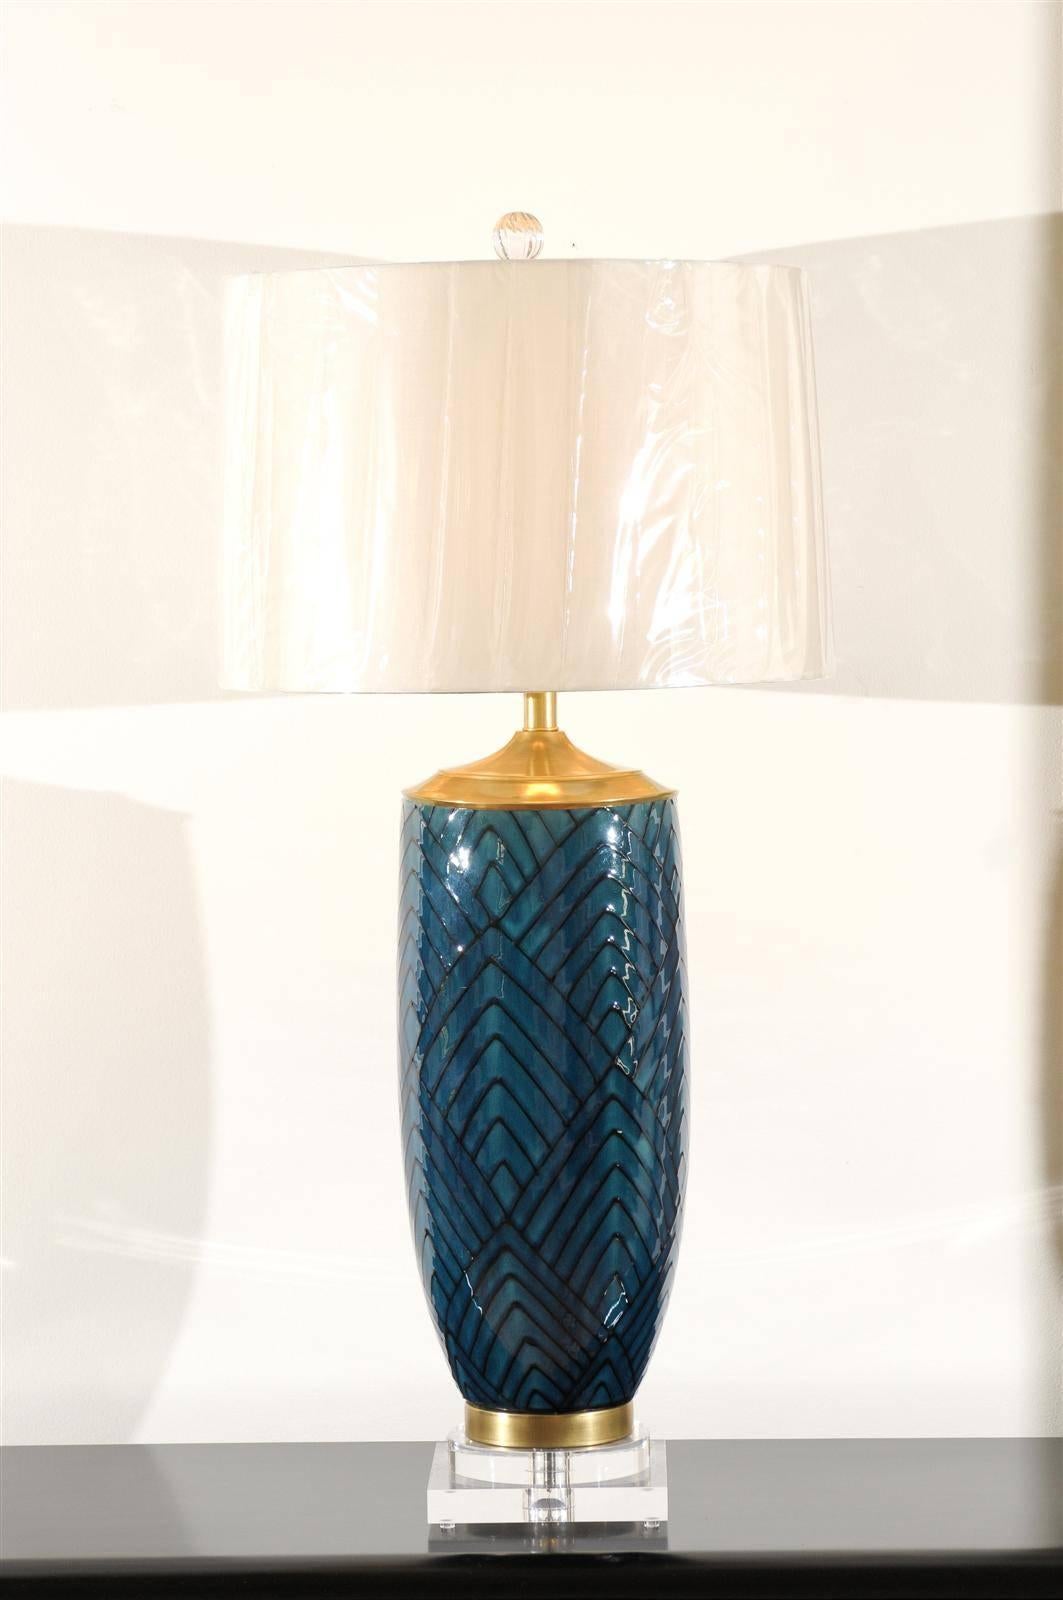 An absolutely stunning pair of large-scale vintage lamps, circa 1970. Handsome ceramic vessels with a lovely geometric motif and accents of solid brass. Mounted on a new two-step base crafted from thick Museum quality Lucite. Heavy, exceptionally